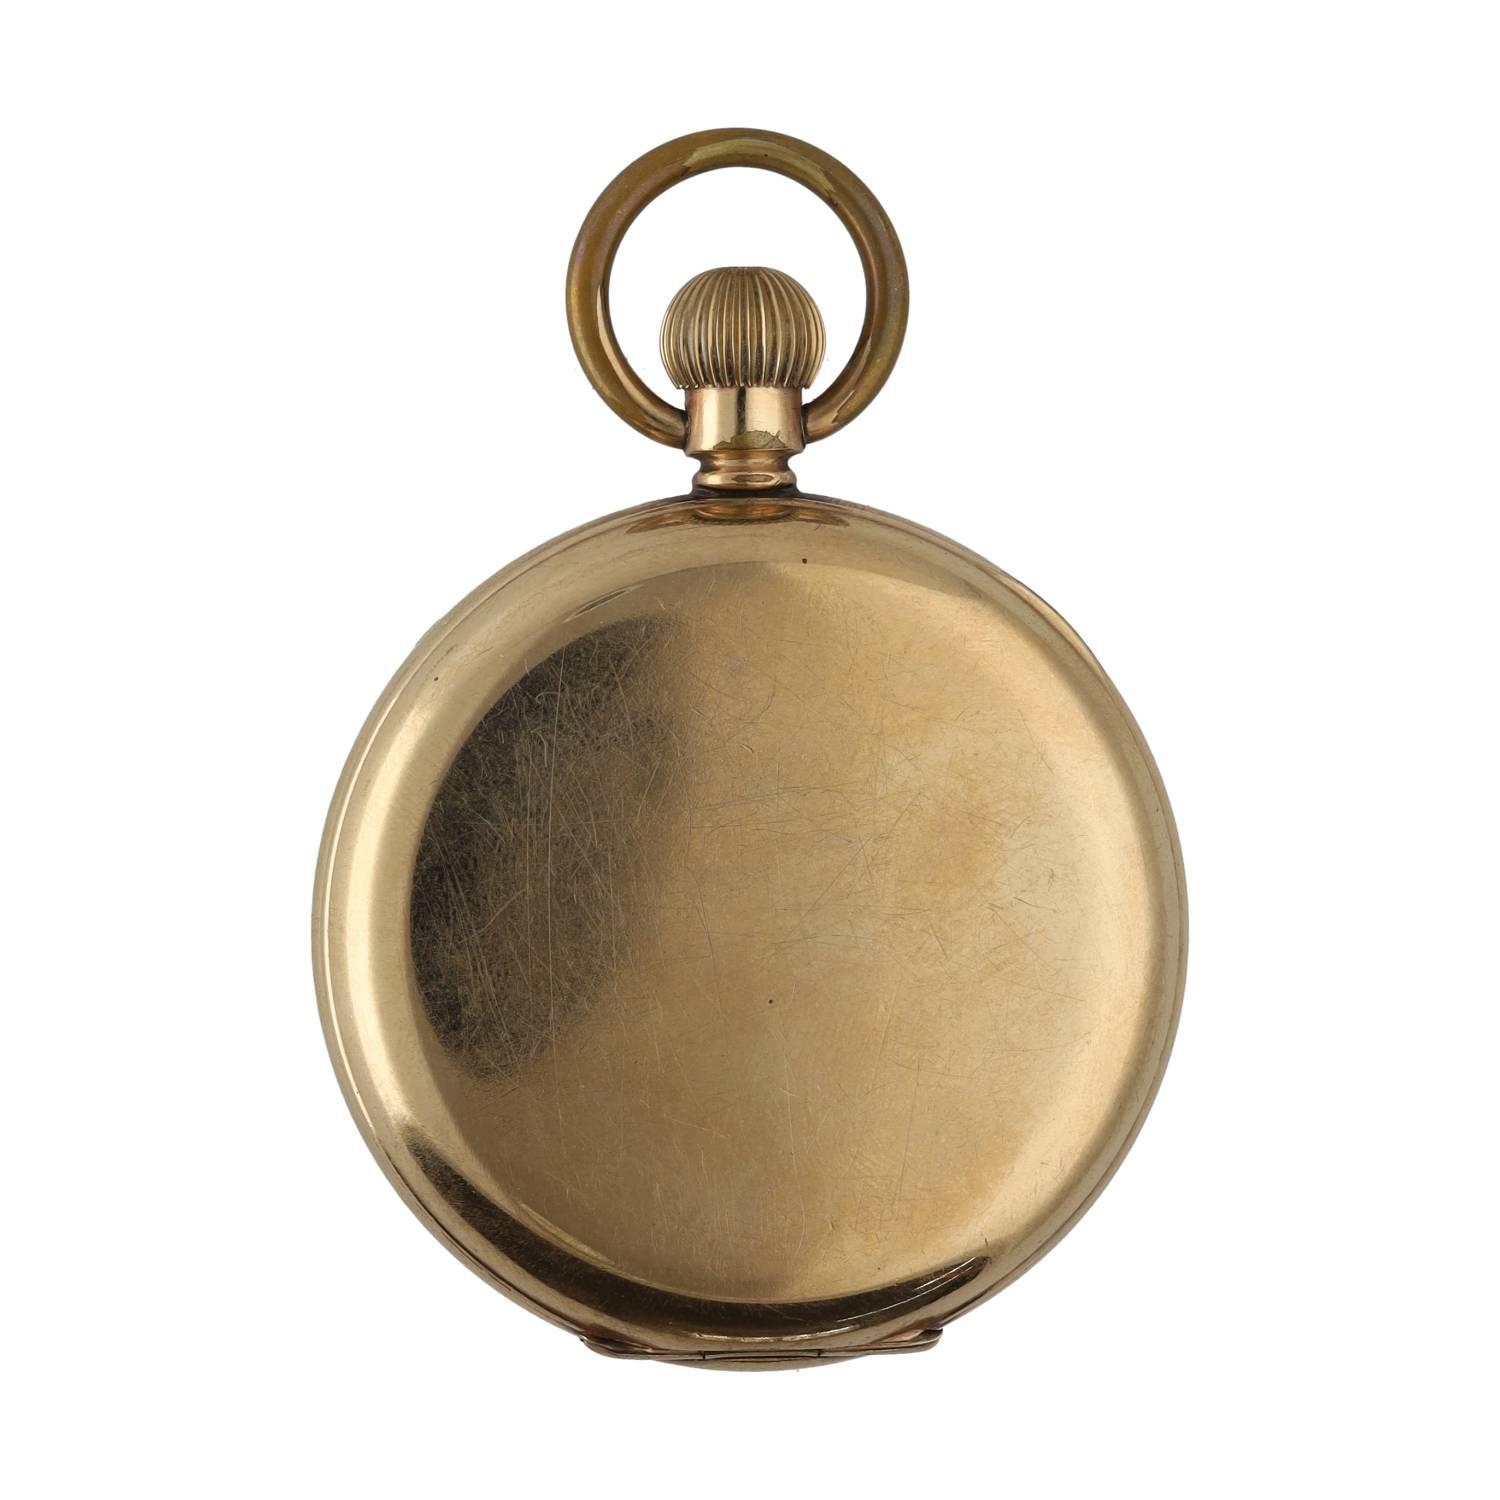 American Waltham gold plated lever pocket watch, circa 1902, serial no. 11562818, signed 15 jewel - Image 3 of 3